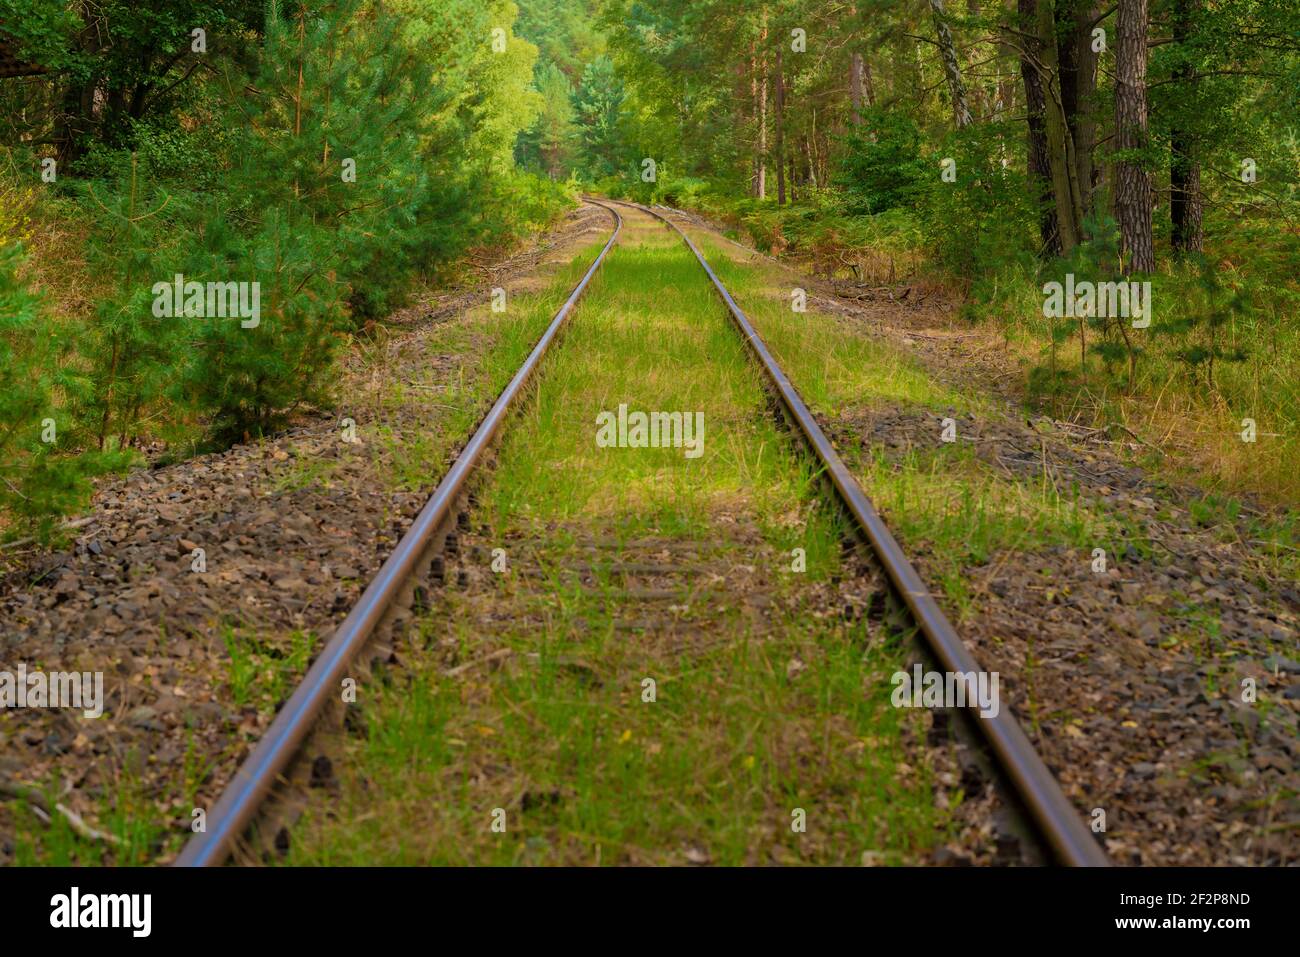 Old railway tracks that are no longer used in Germany, Trees next to the railway tracks, Wildgrass on the track bed Stock Photo